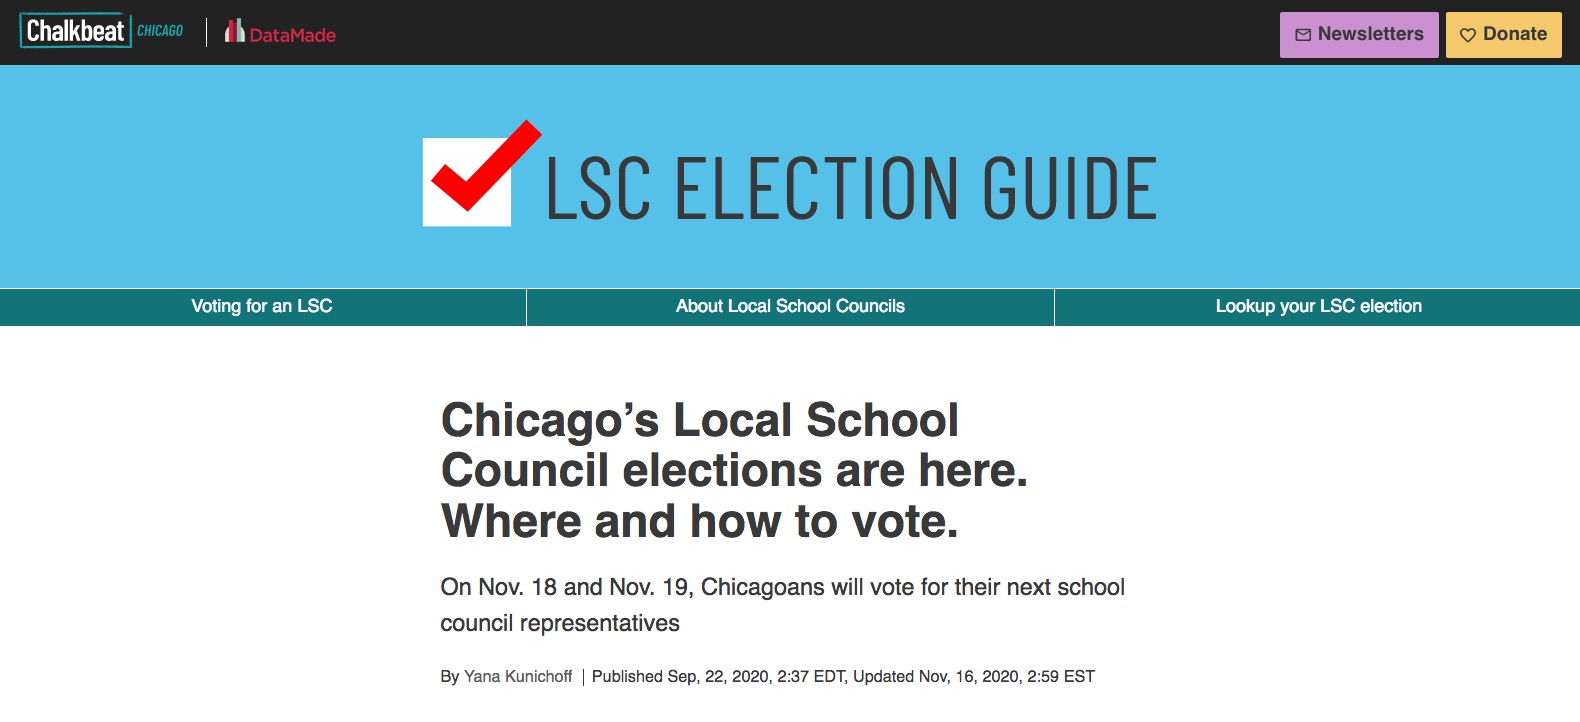 Chicago’s Local School Council elections are here. Where and how to vote.